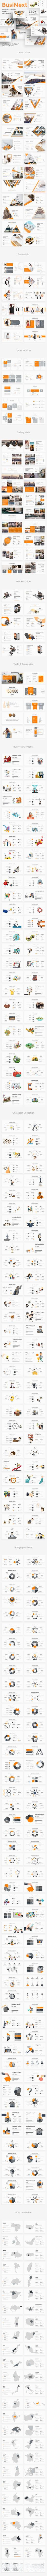 BusiNext Fully Animated Pitch Deck Powerpoint Template